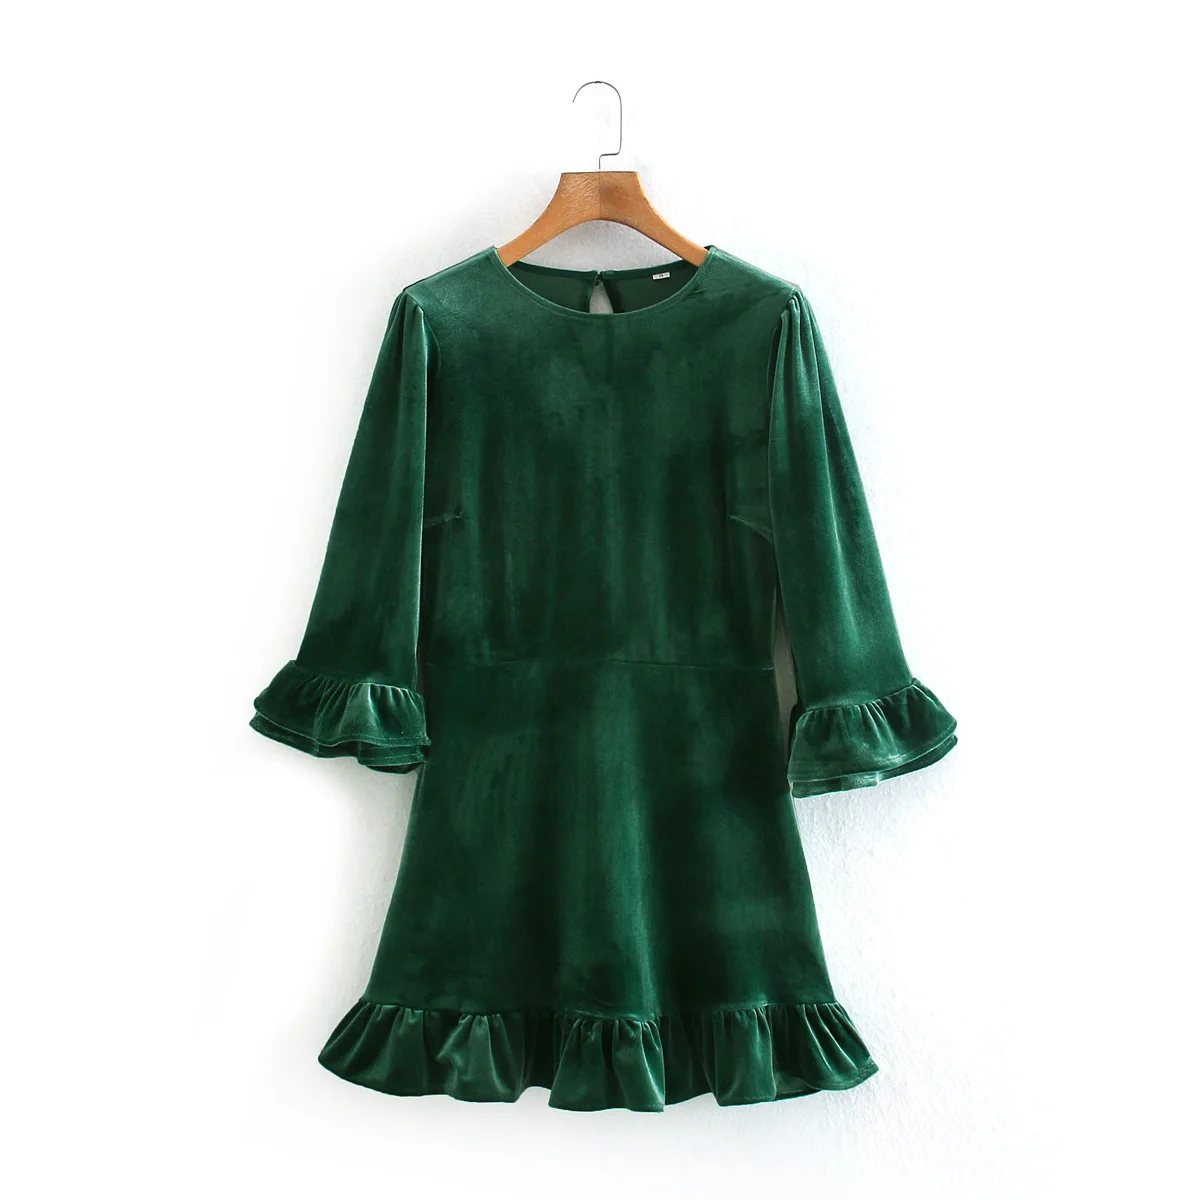 Green Color Flare Sleeve Crew Neck Fashion Design Women Casual Velvet Dress  With Ruffles - Buy Velvet Dress,Dress Women,Casual Dress Product on  Alibaba.com